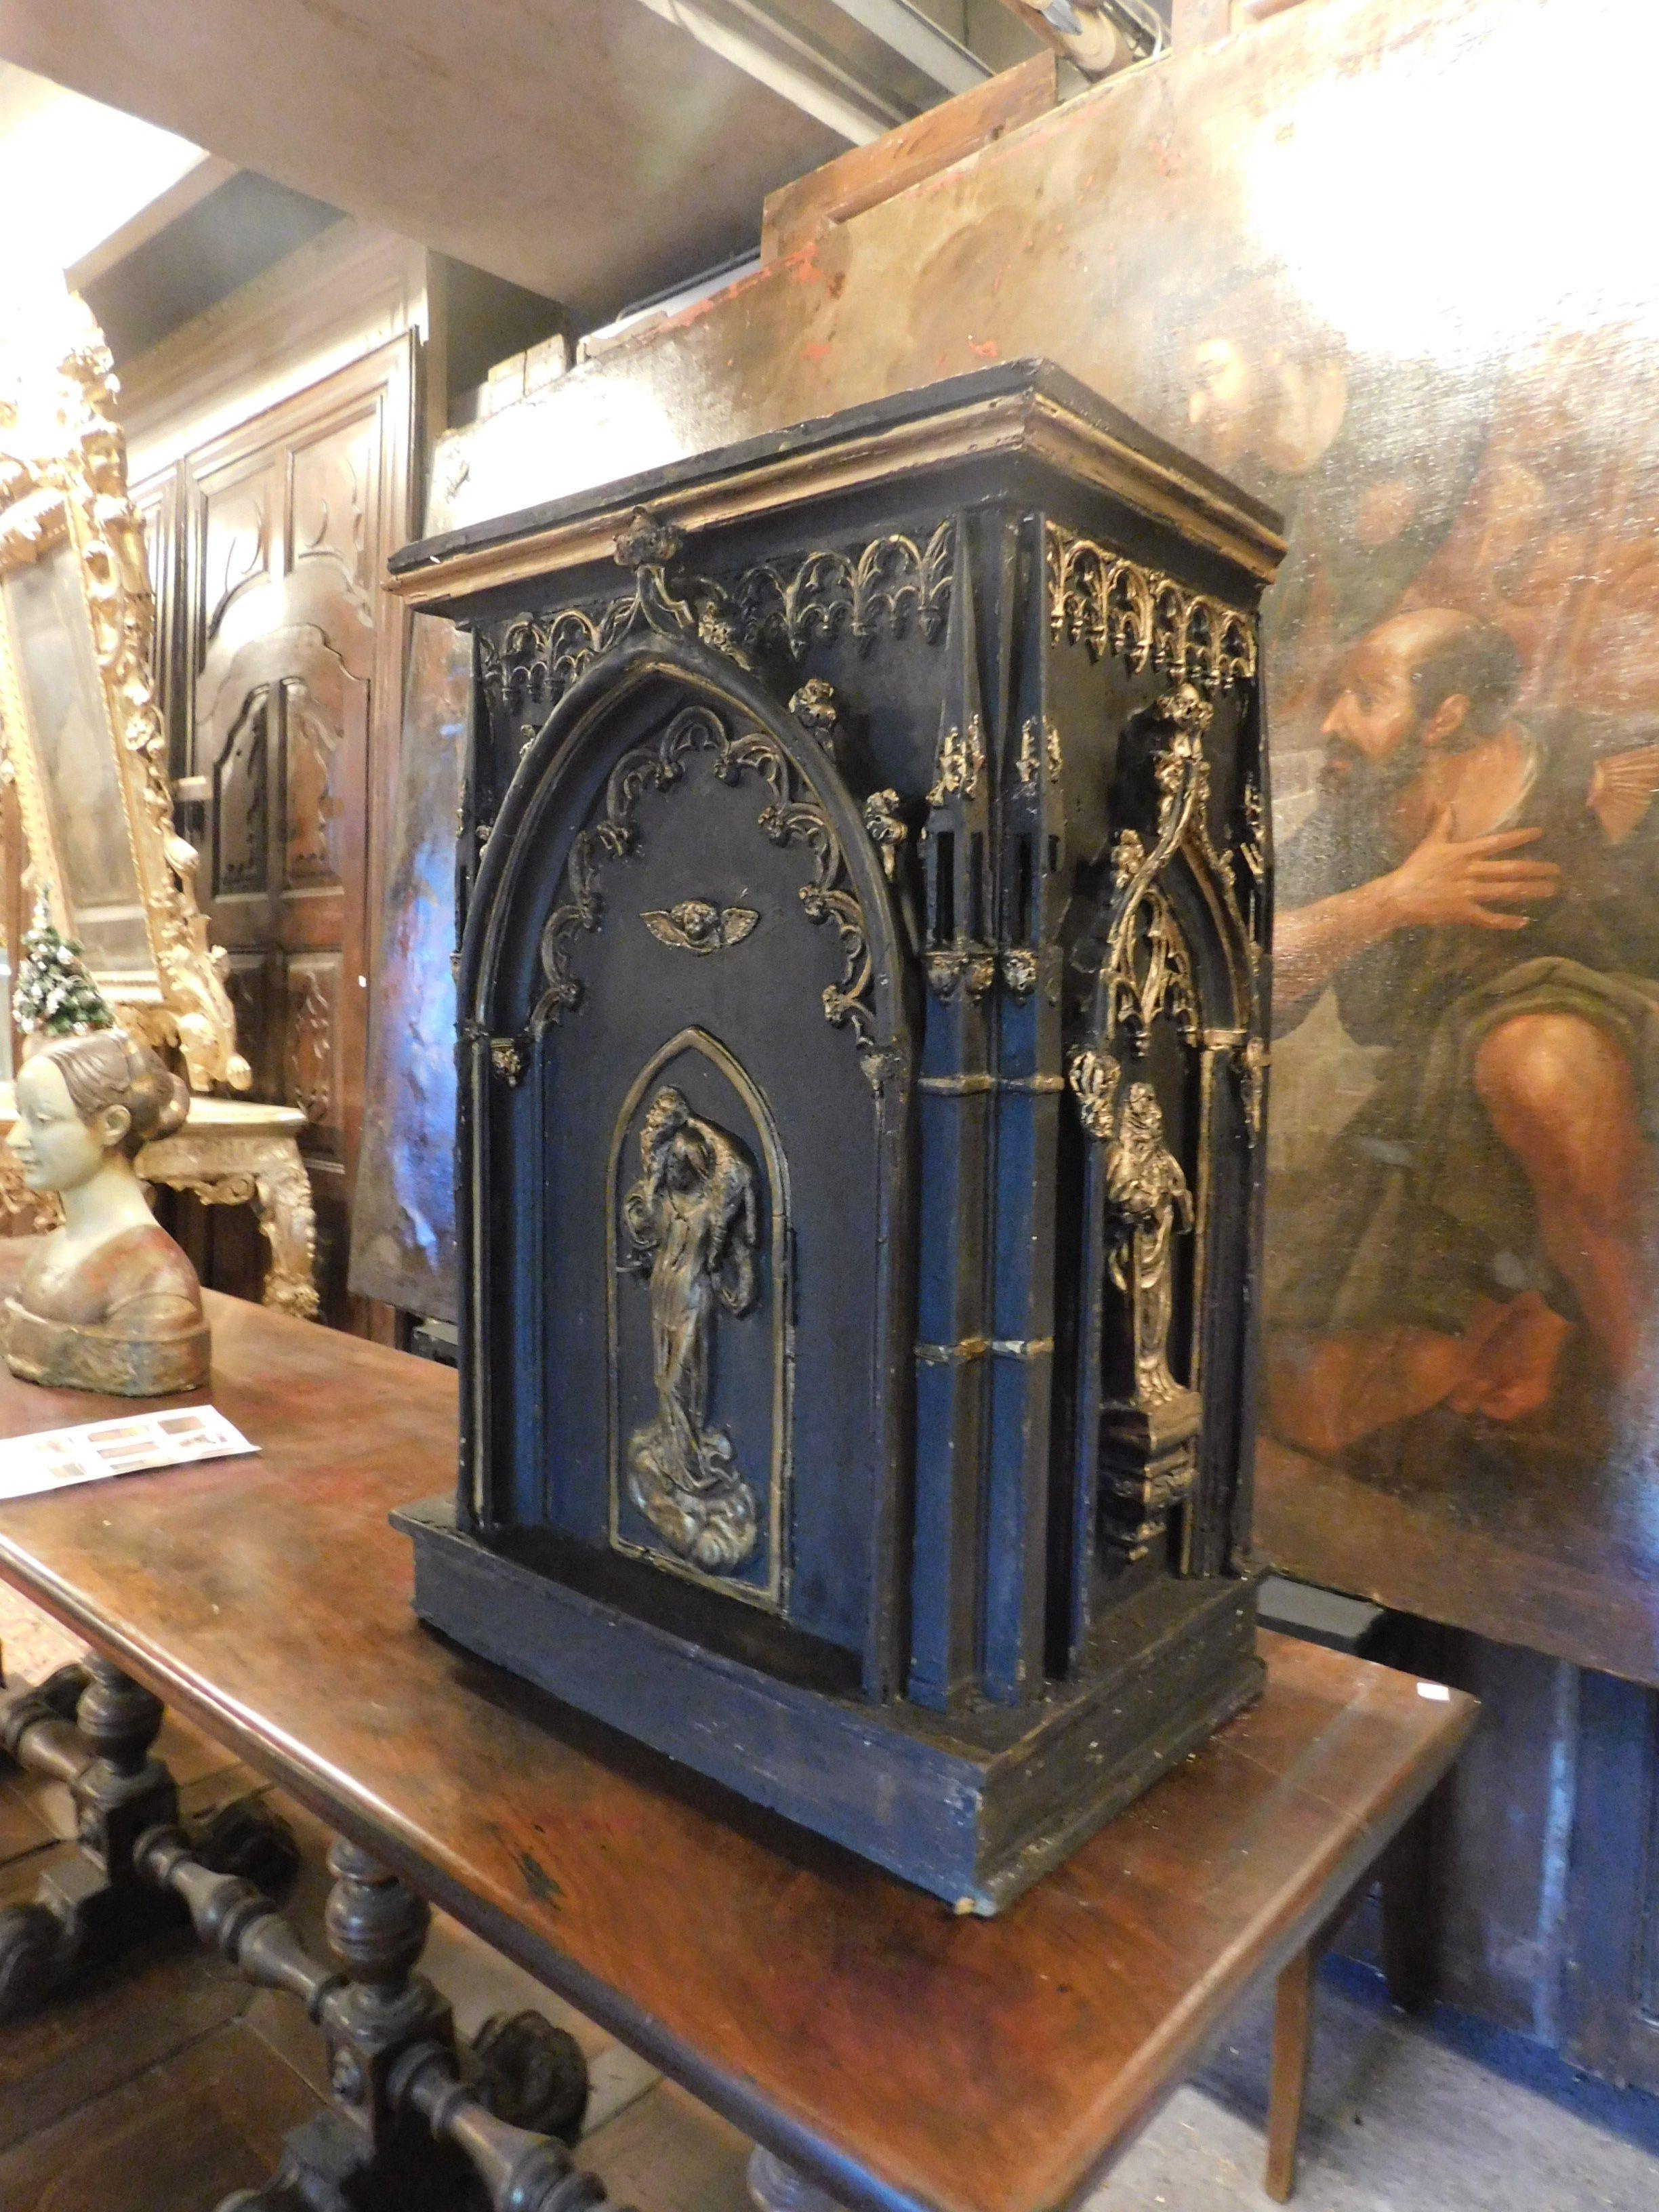 Ancient altar tabernacle in black lacquered wood with gold sculpture finishes, all carved by hand, has an arched door that can be opened on the davanyti, so it can be used as cabinets or storage of important objects. The finishes, the sculptures are